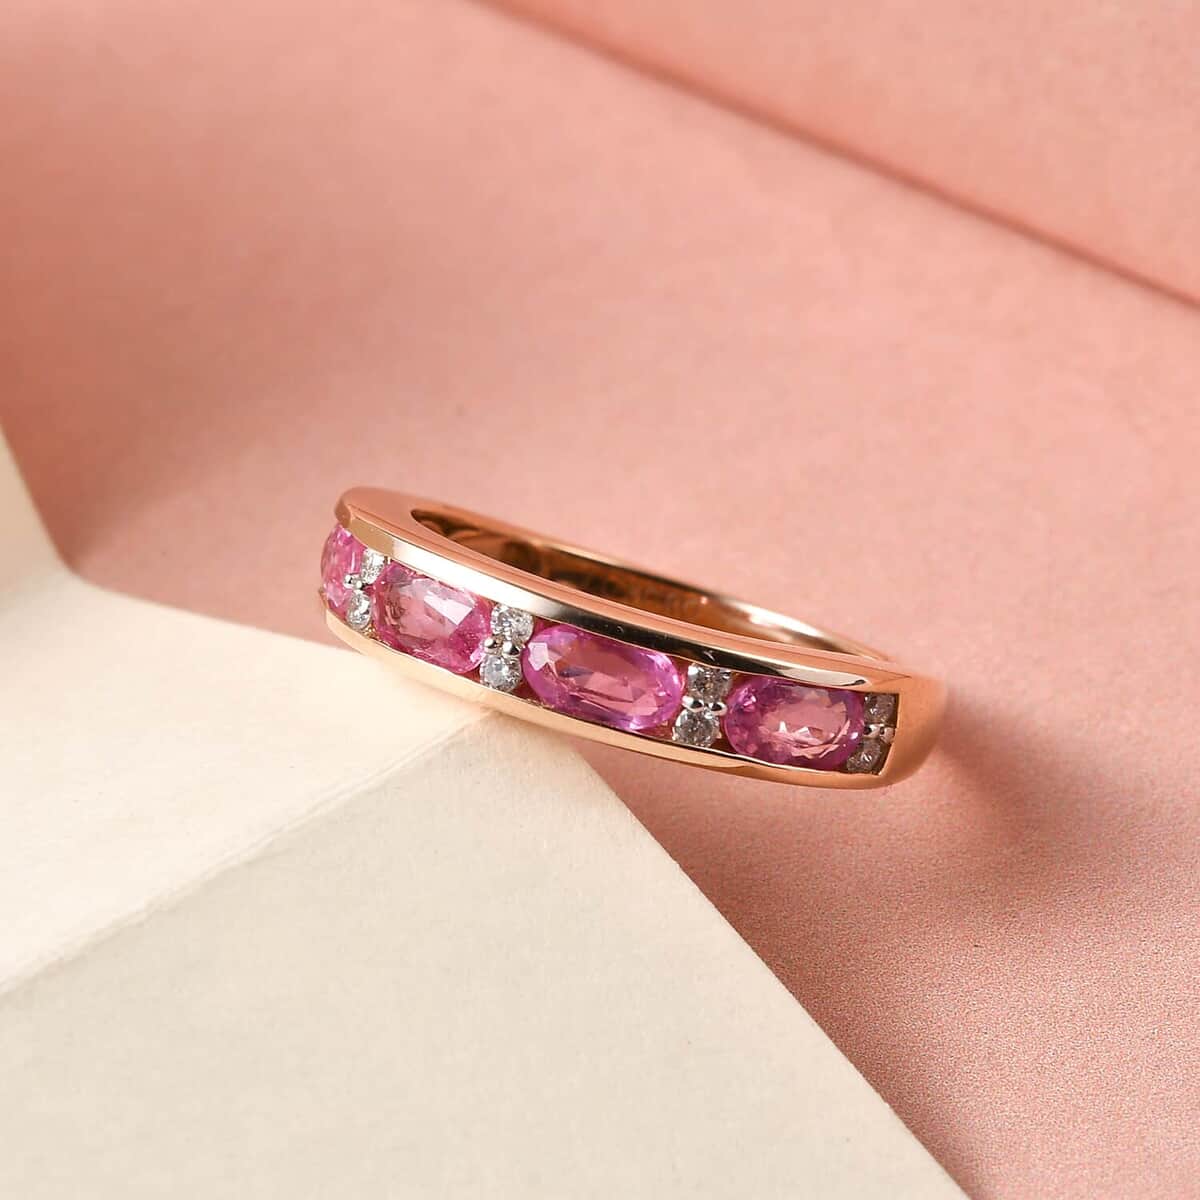 Luxoro 10K Rose Gold Premium Madagascar Pink Sapphire and Diamond Band Ring, Sapphire Jewelry, Birthday Anniversary Gift For Her 1.25 ctw (Size 7.0) image number 1